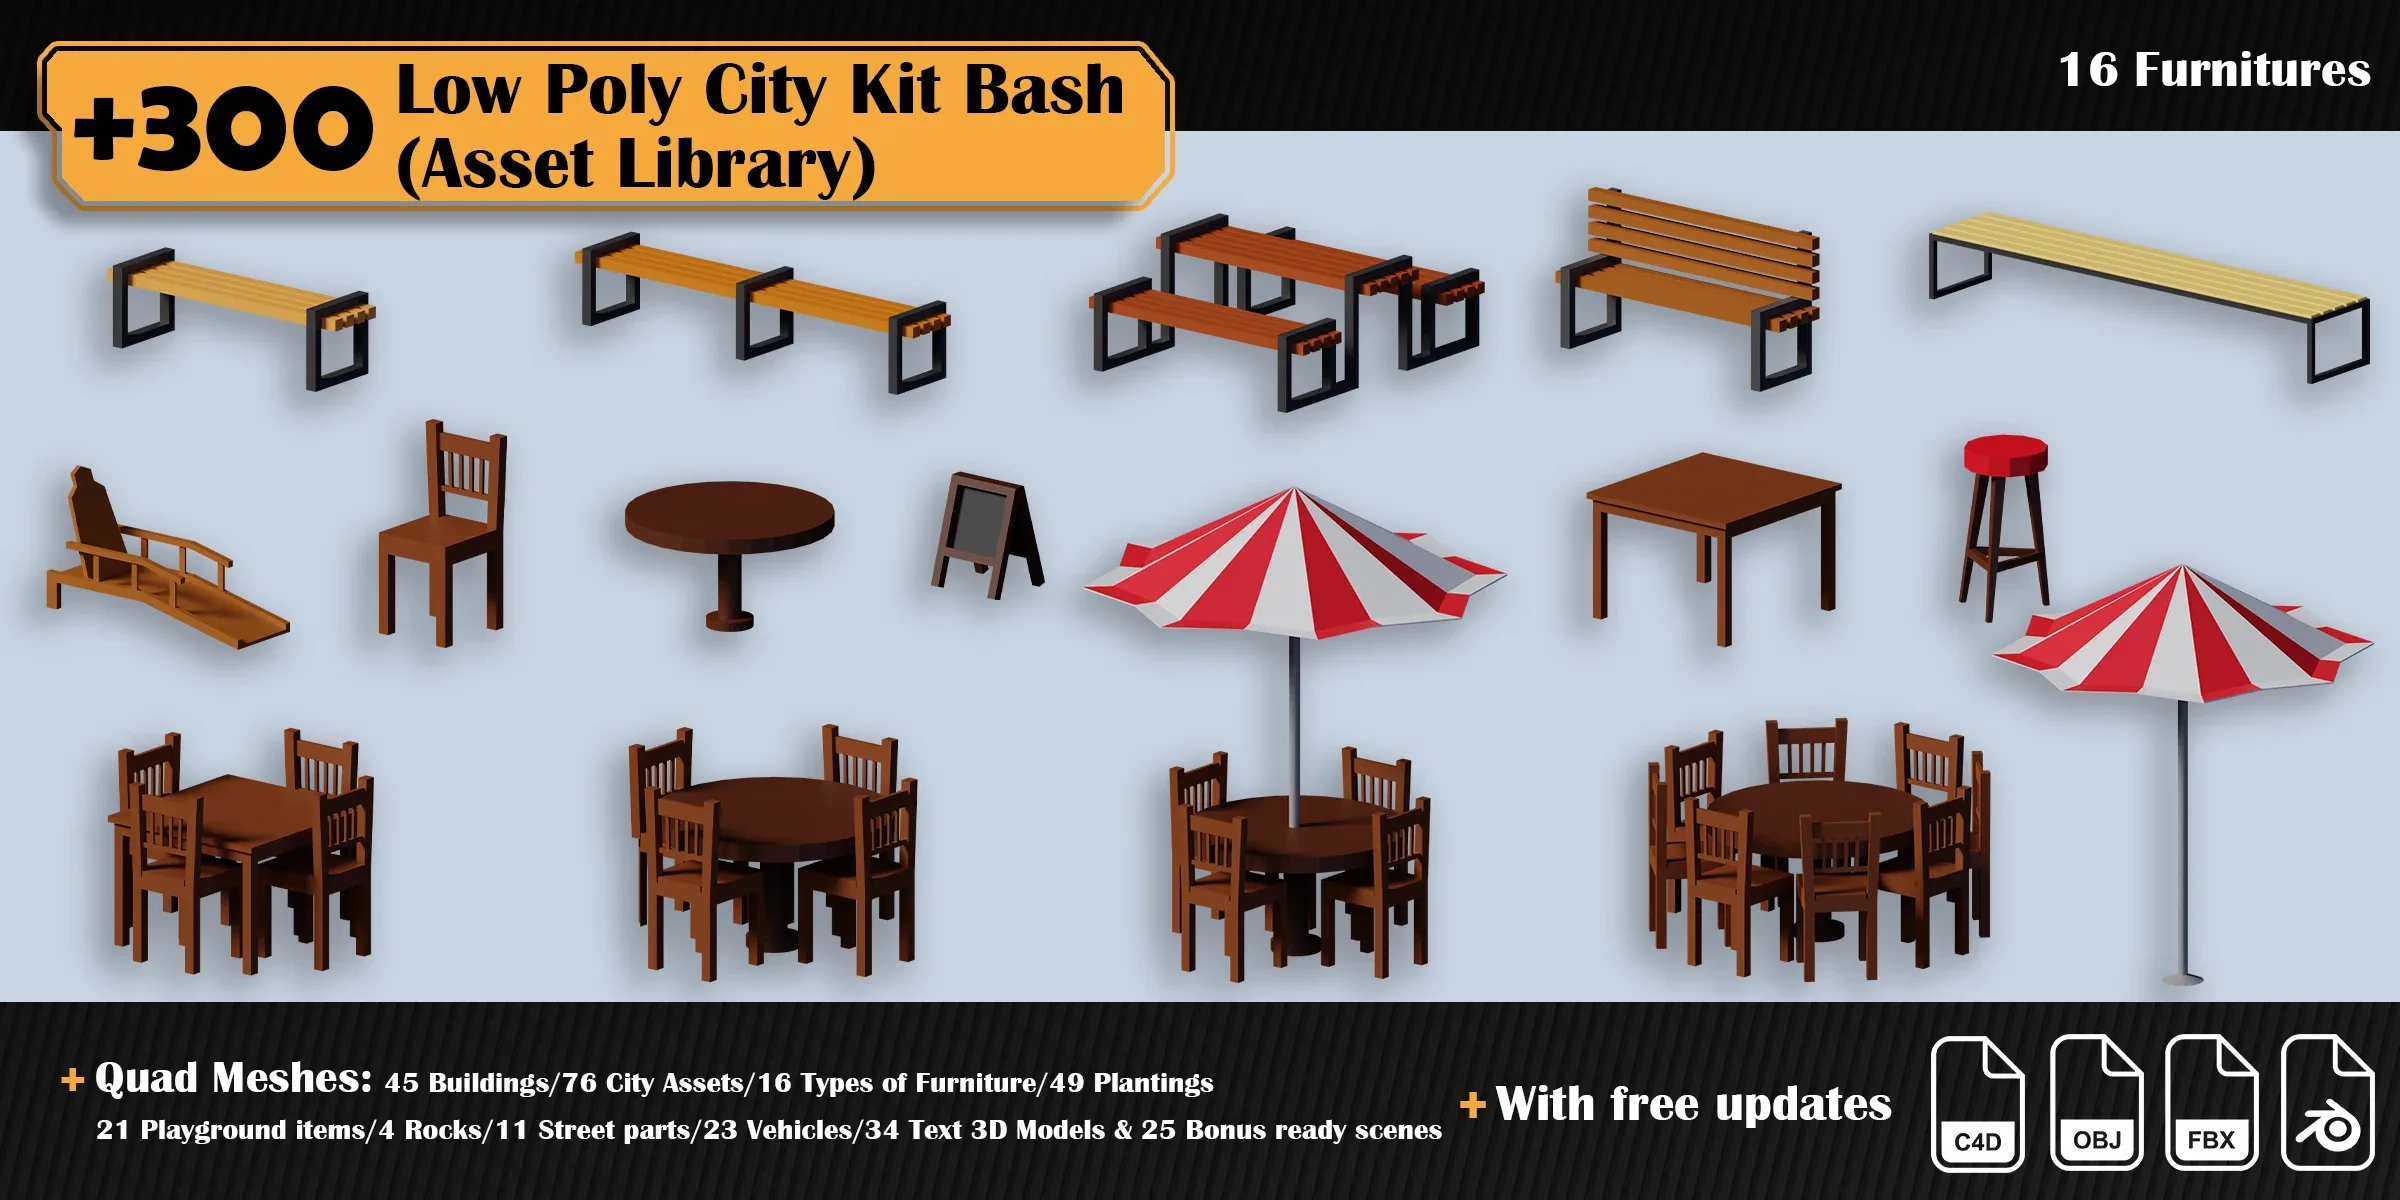 Low Poly City Asset Library Kitbash (+300 Objects)